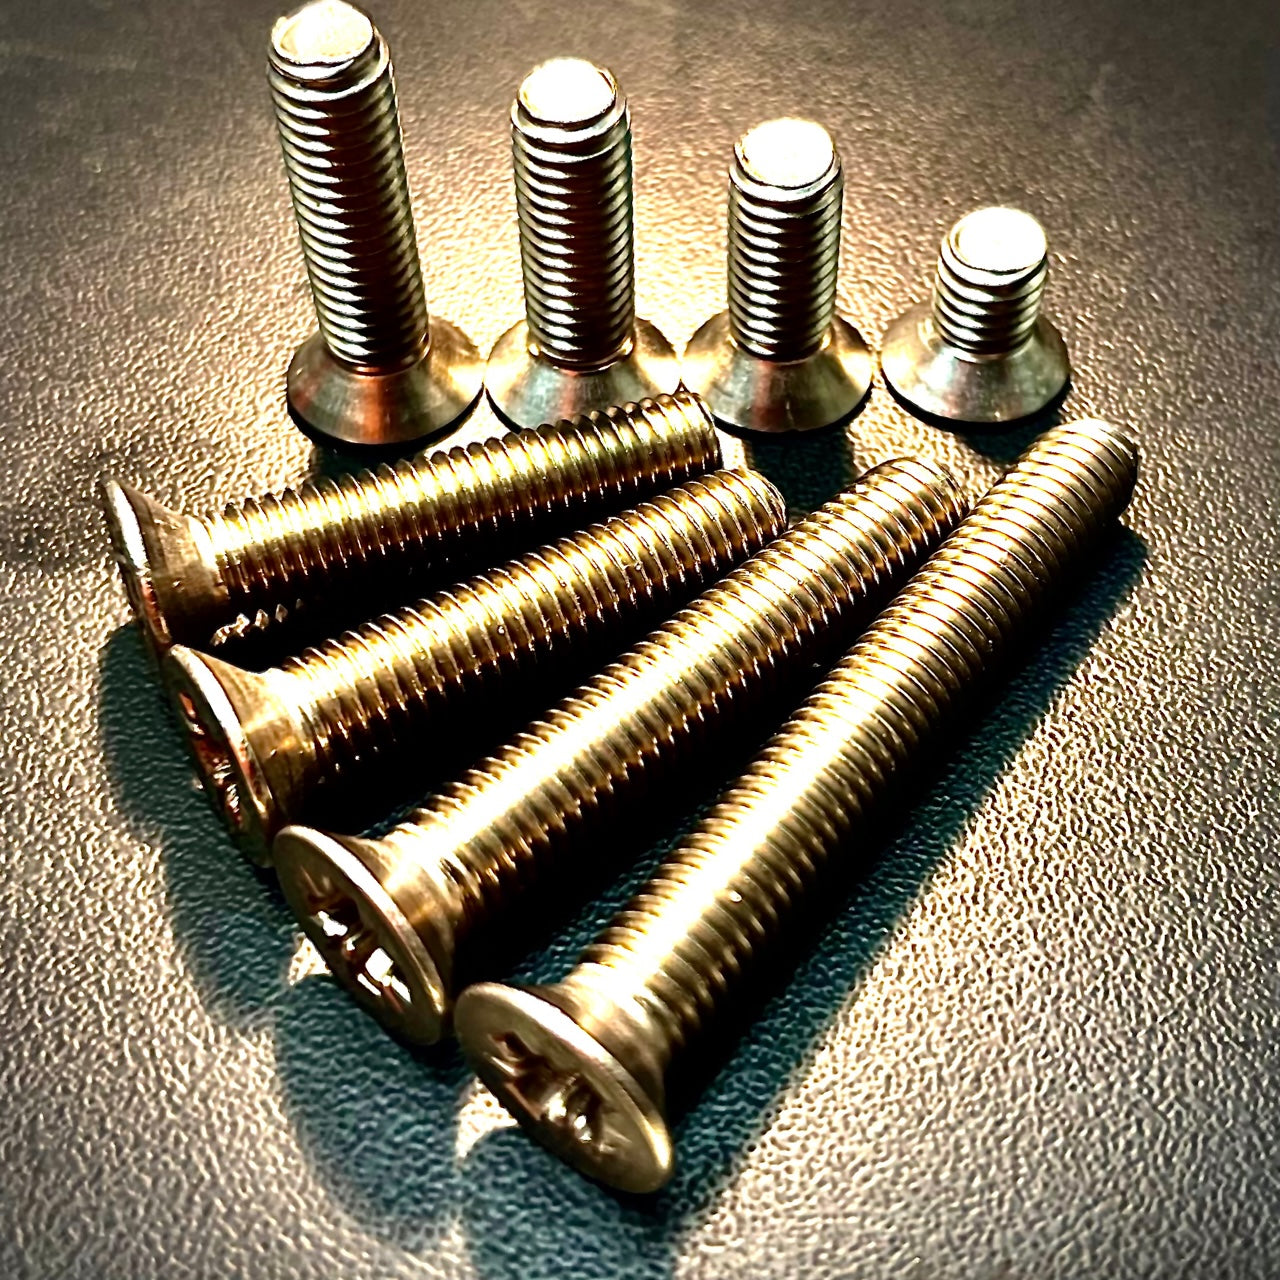 M5 x Over 50mm Machine Screws Pozi Countersunk A2/304 Stainless Steel - Fixaball Ltd. Fixings and Fasteners UK